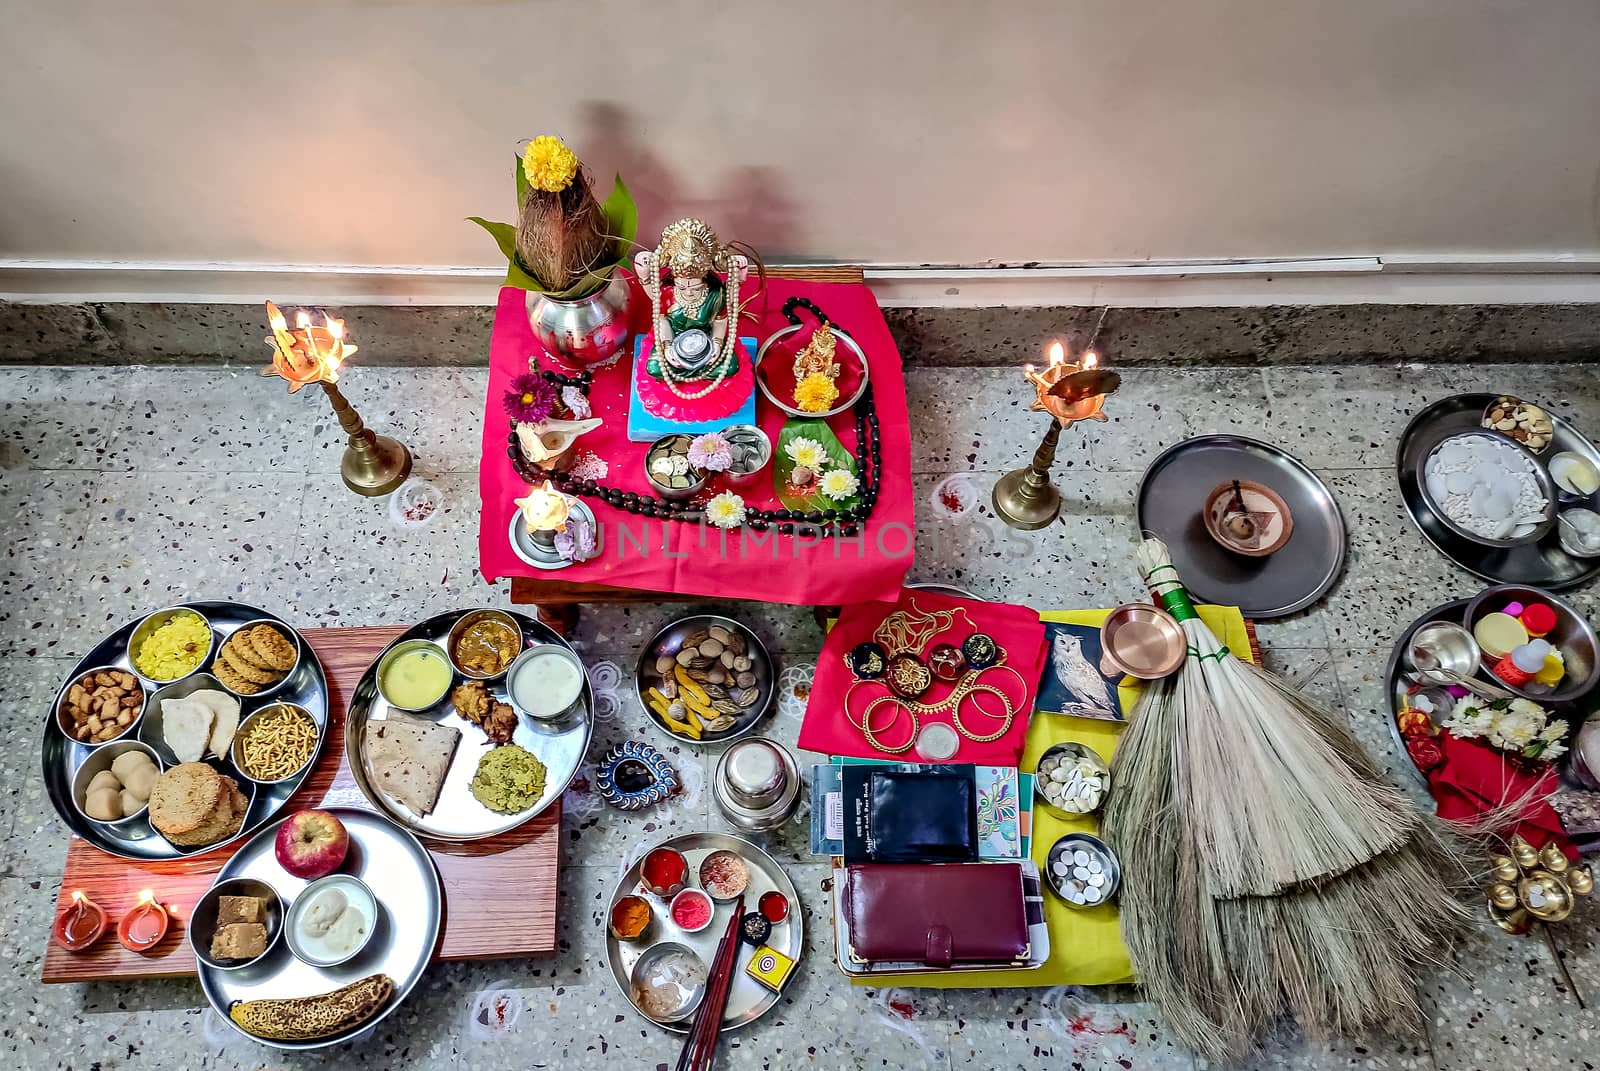 Whole set of hindu pooja articles neatly systematically arranged before performing goddess Laxmi pooja.